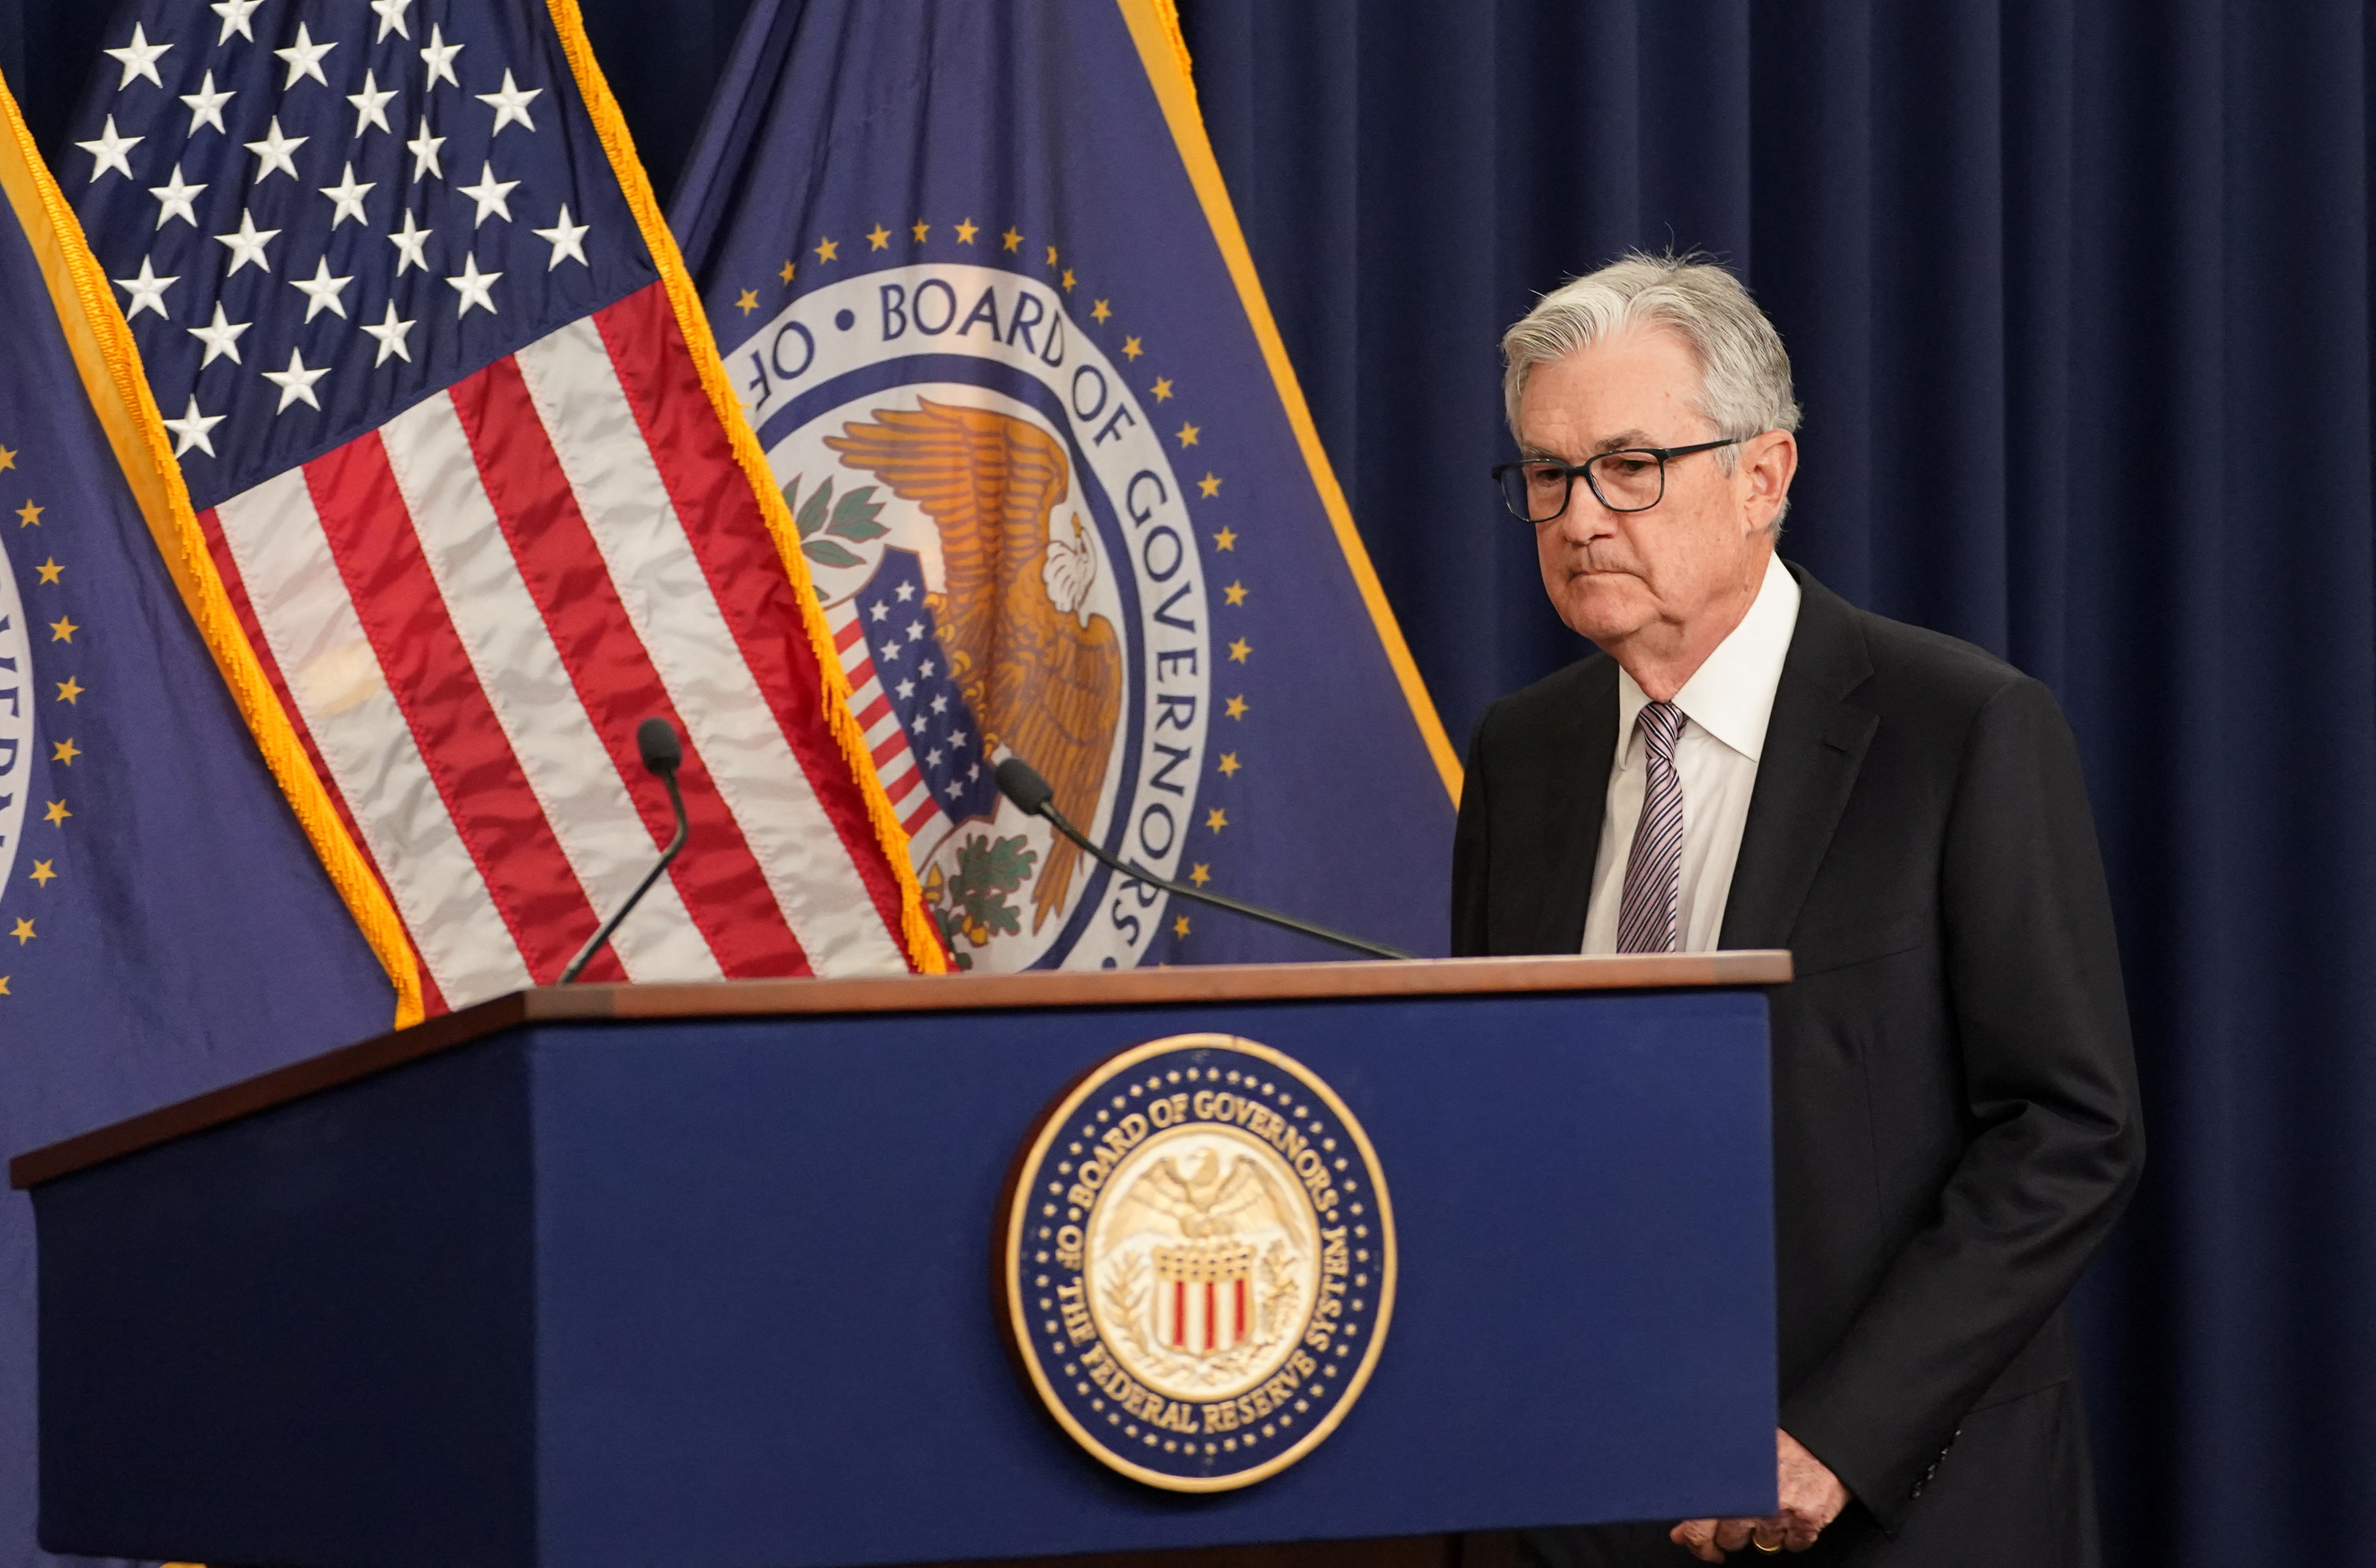 Federal Reserve Chairman Powell held a news conference in Washington